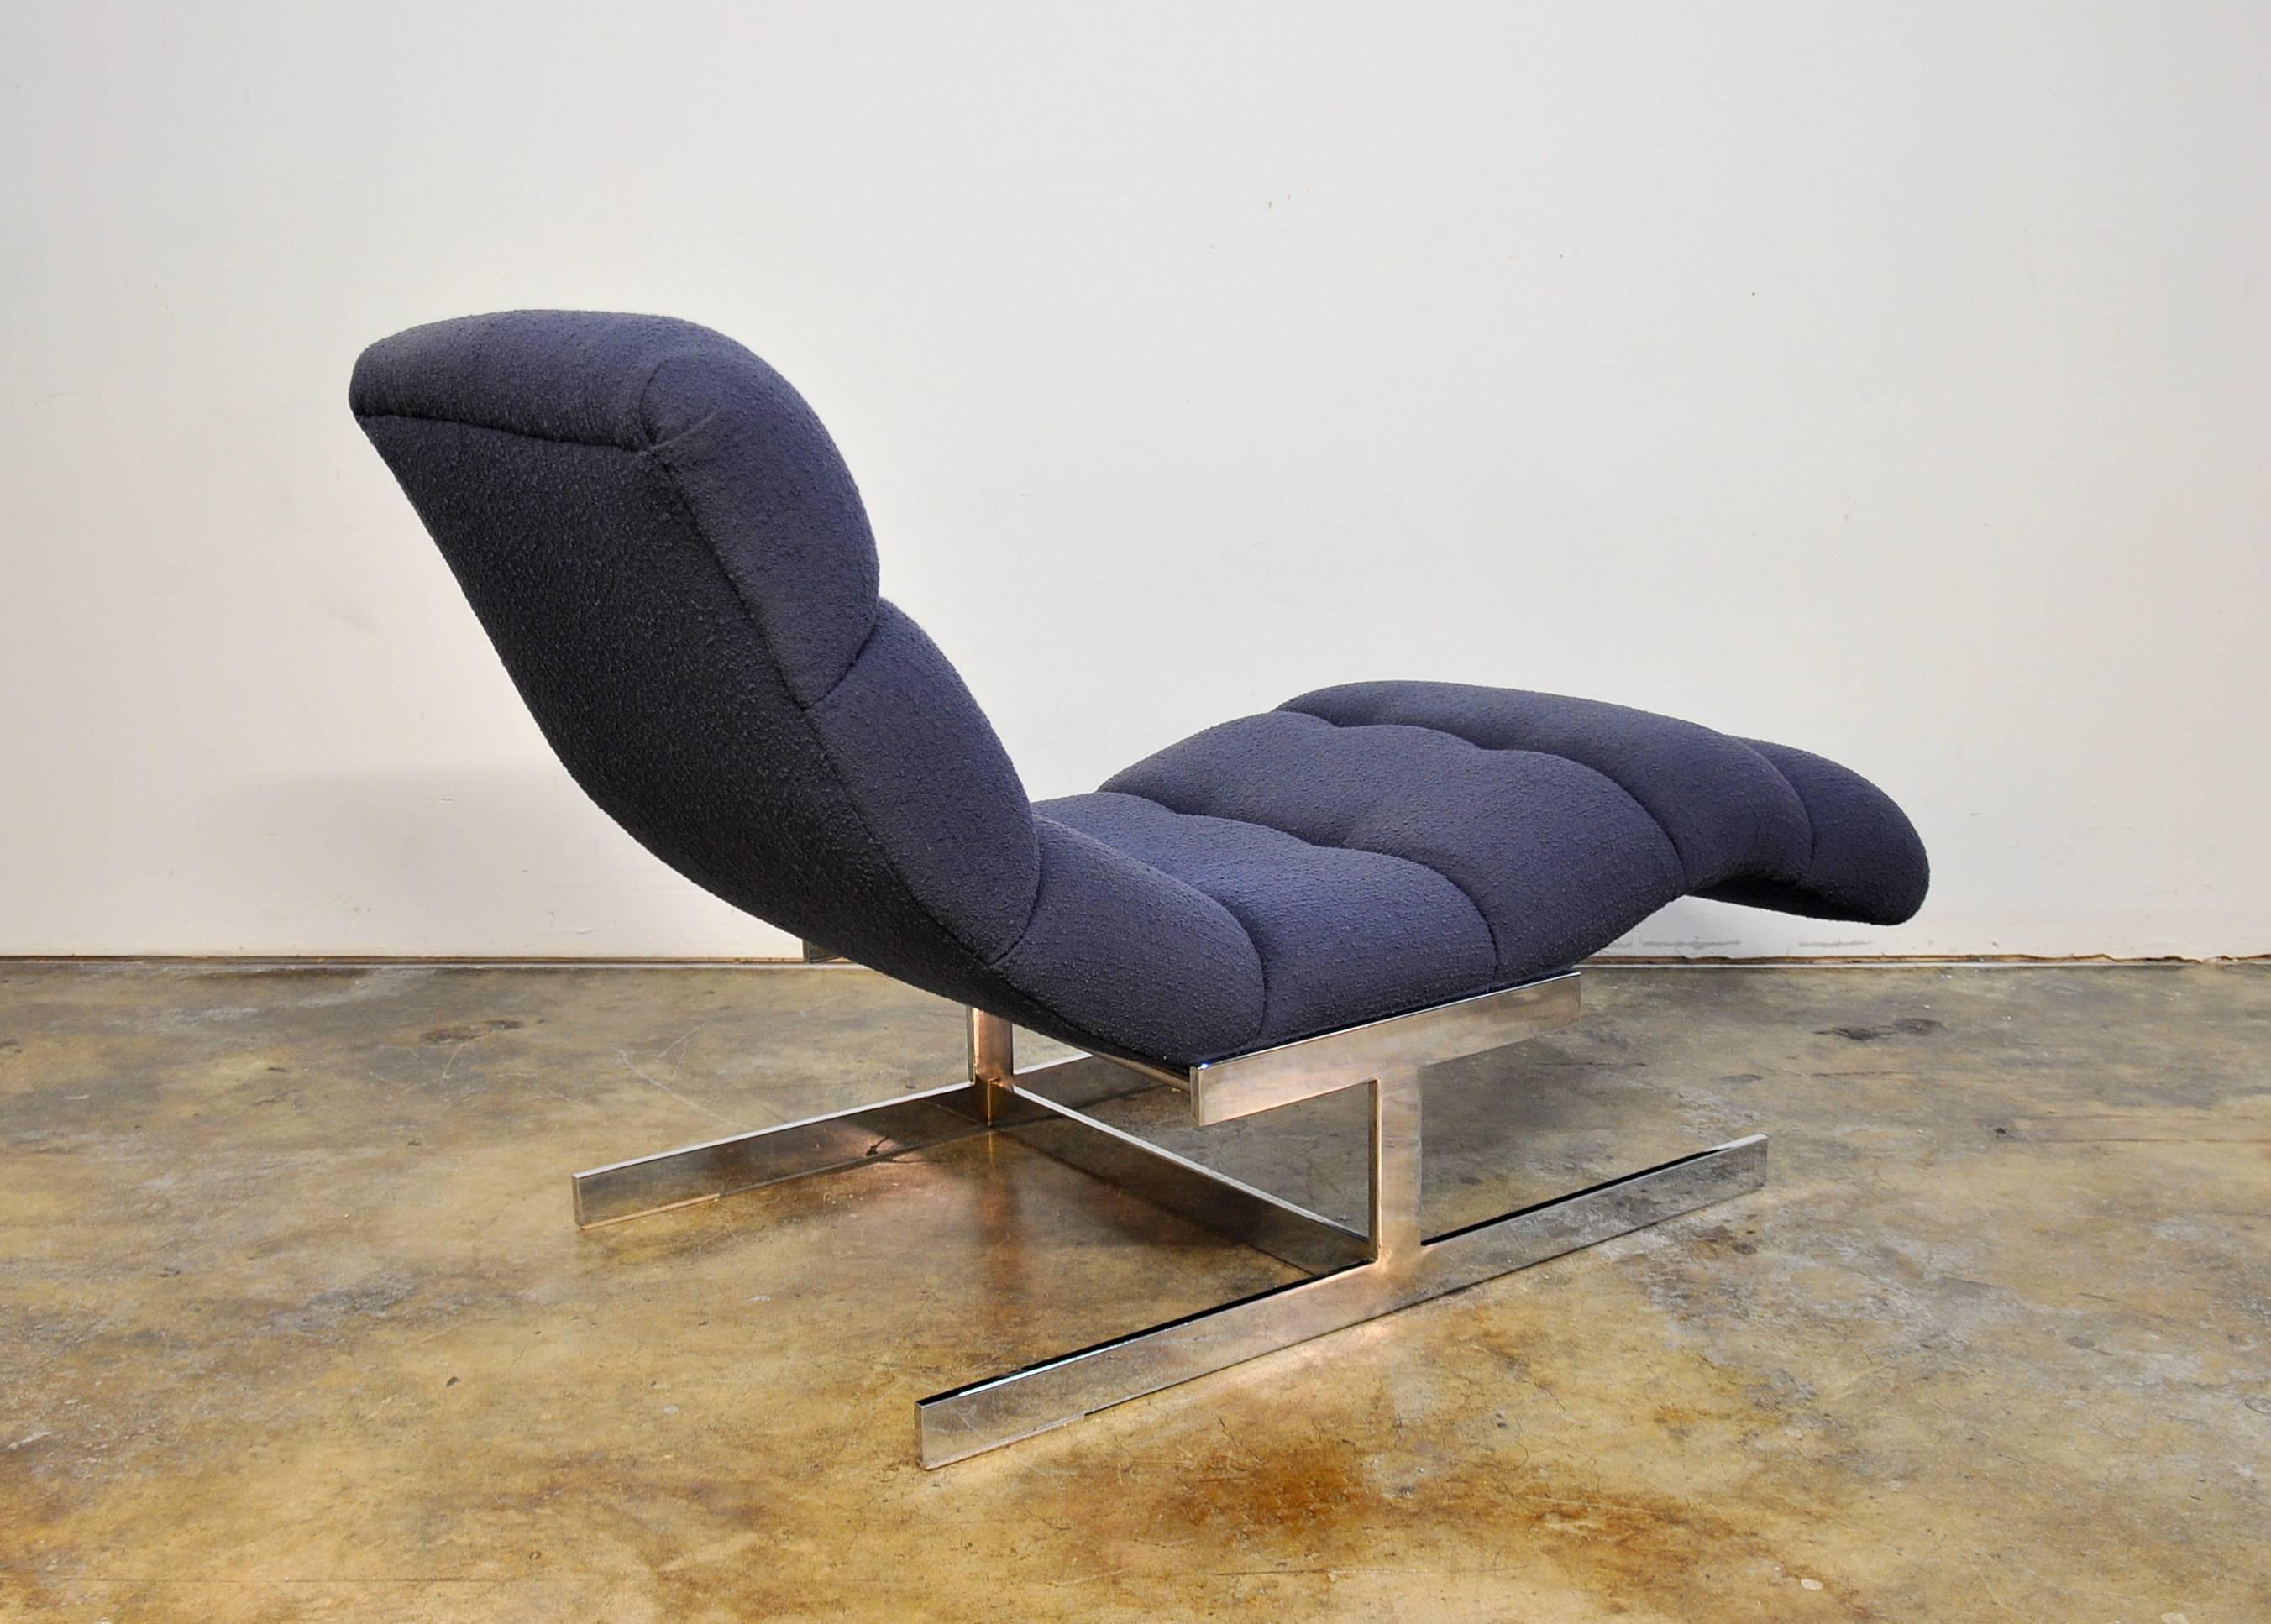 Polished Milo Baughman Wave Chaise Longue by Thayer Coggin, USA, 1970s